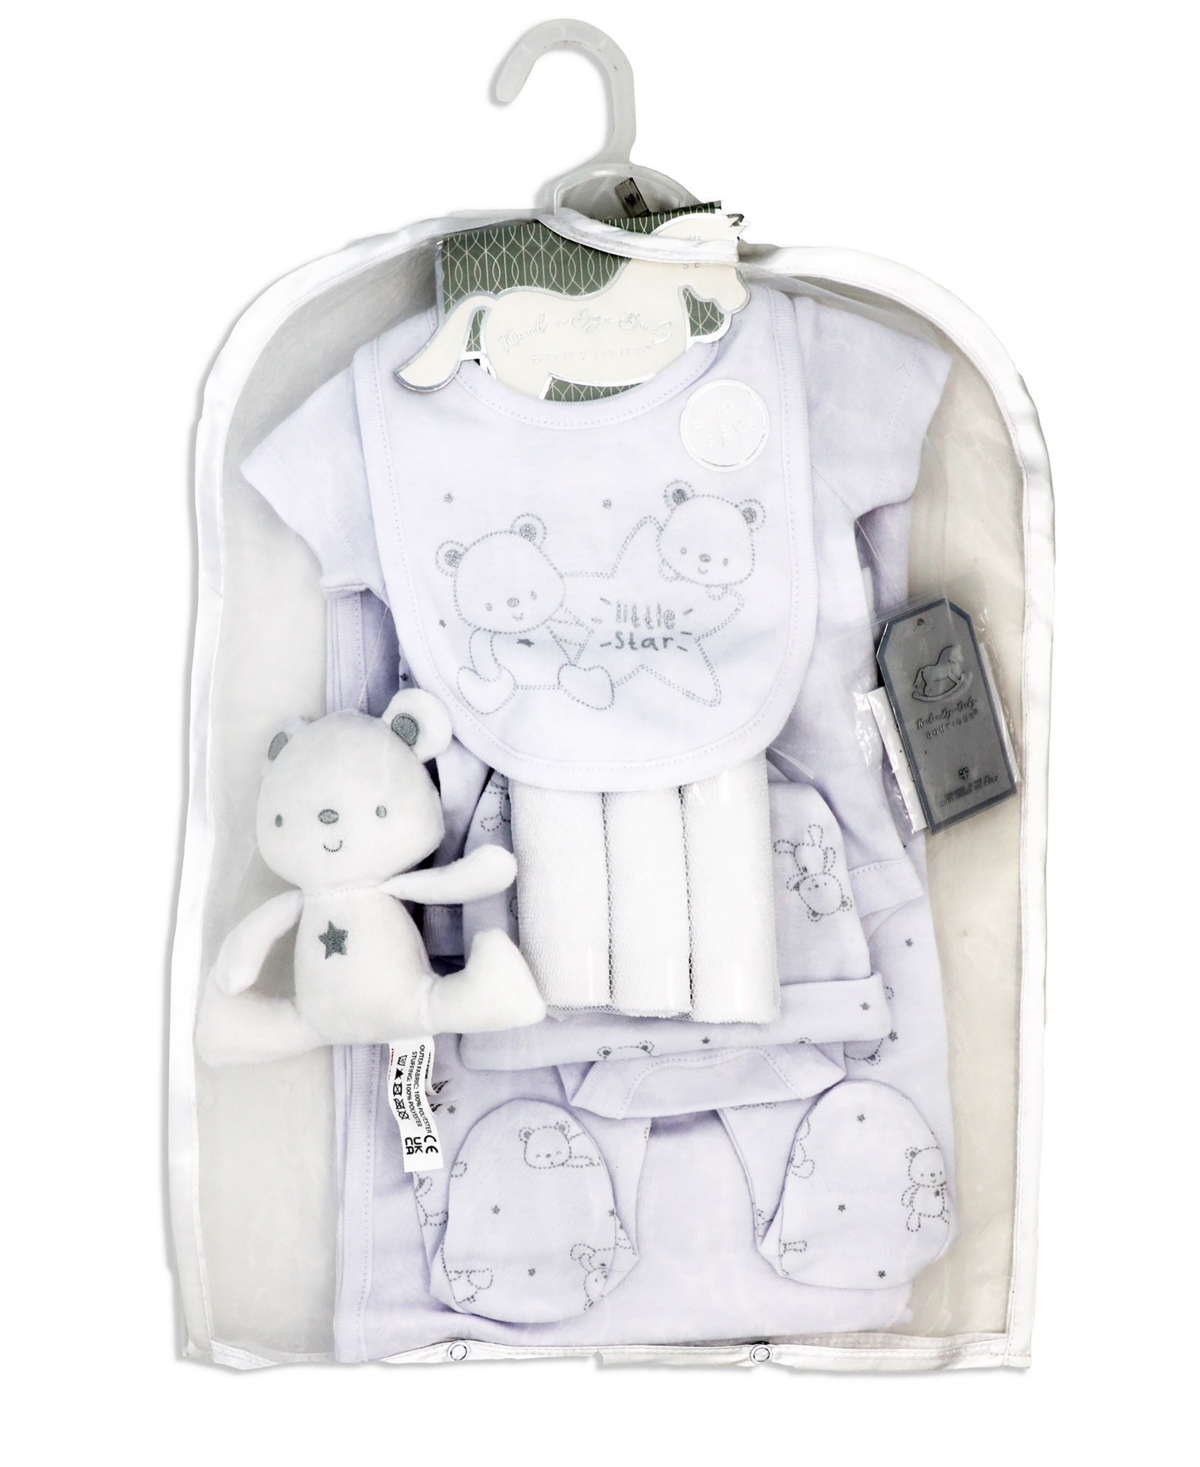 Rock-a-bye Baby Boutique Baby Boys Or Baby Girls Little Star Bear Layette Gift, 10 Piece Set In White